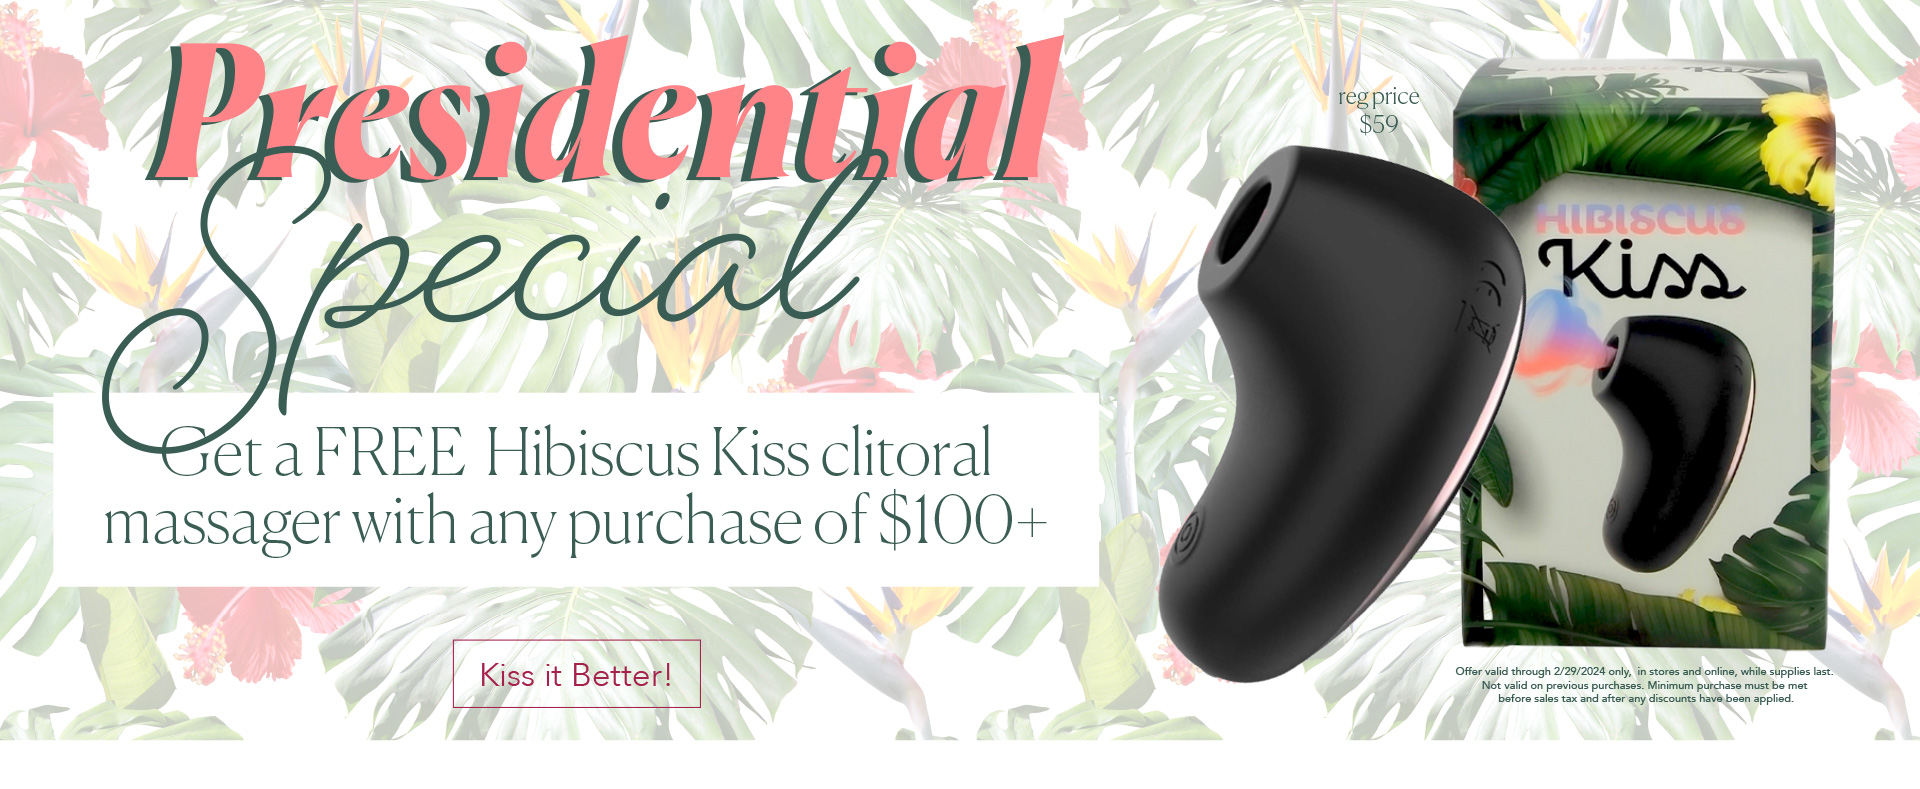 Presidential Special - Get a FREE Hibiscus Kiss clitoral massager with any purchase of $100+